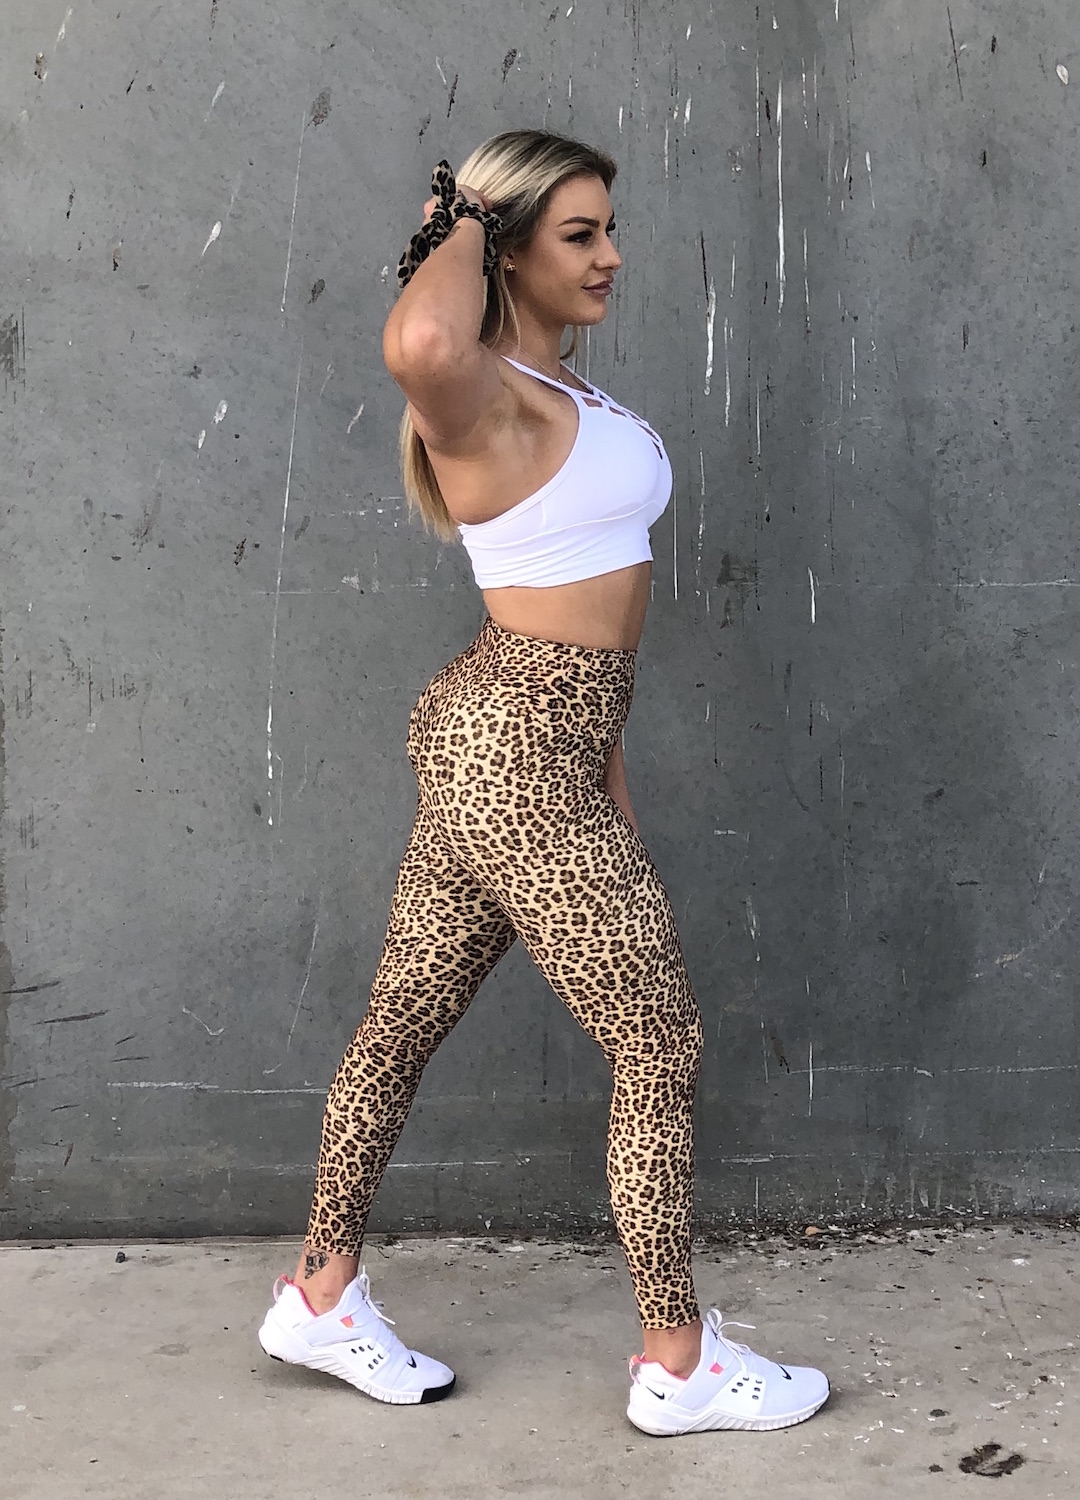 15 Outfits With Leopard Printed Leggings - Styleoholic